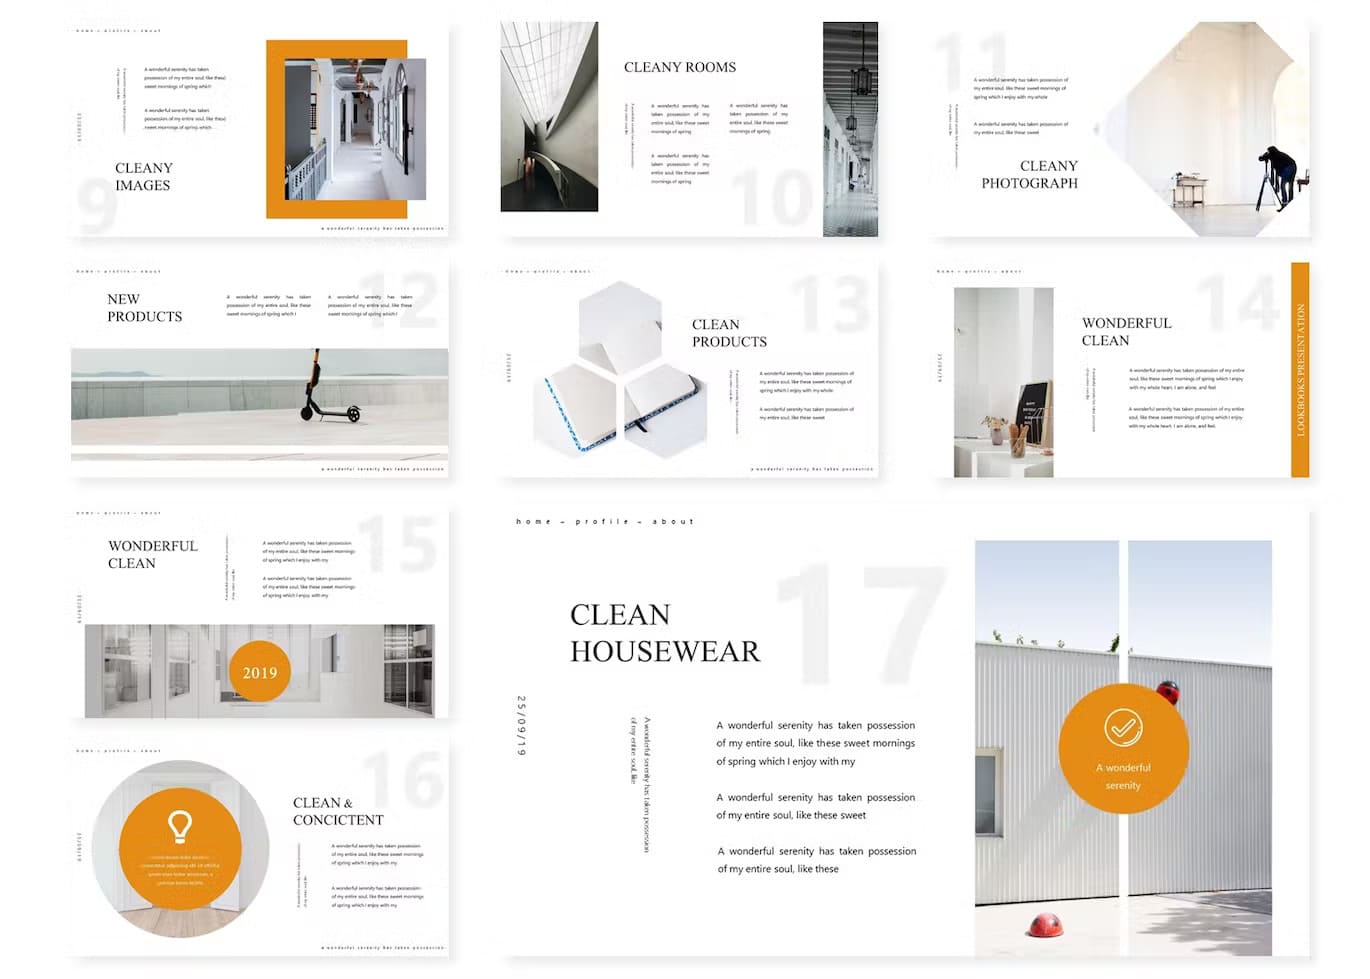 Cleastyle, 8 slides: Cleany Images, Cleany Rooms, New Products, Clean Products.